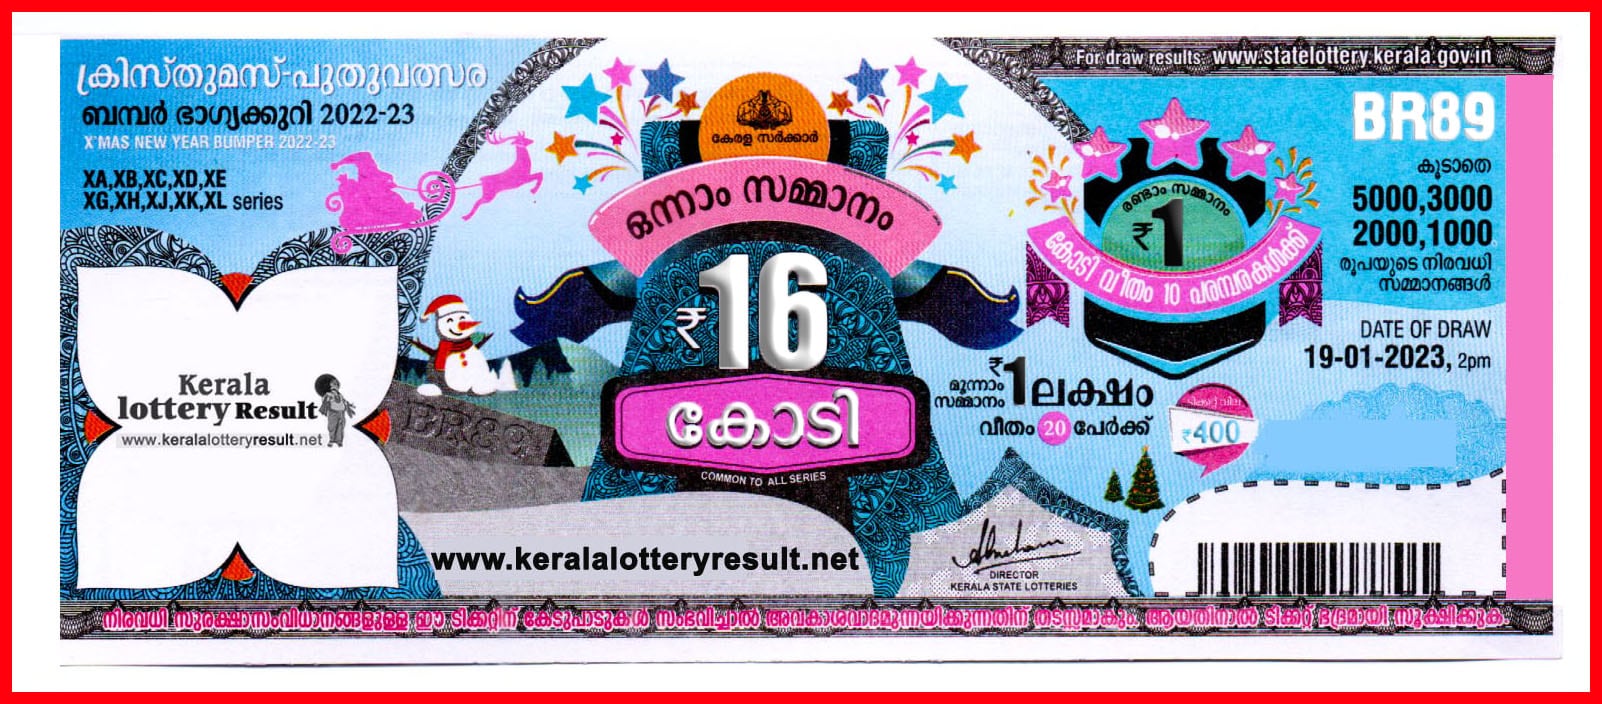 Kerala Lottery Agent Wins Rs 1 Cr With Unsold Ticket; Know Today's Win Win  W 738 Monday Lucky Draw Winners List And Prize Money